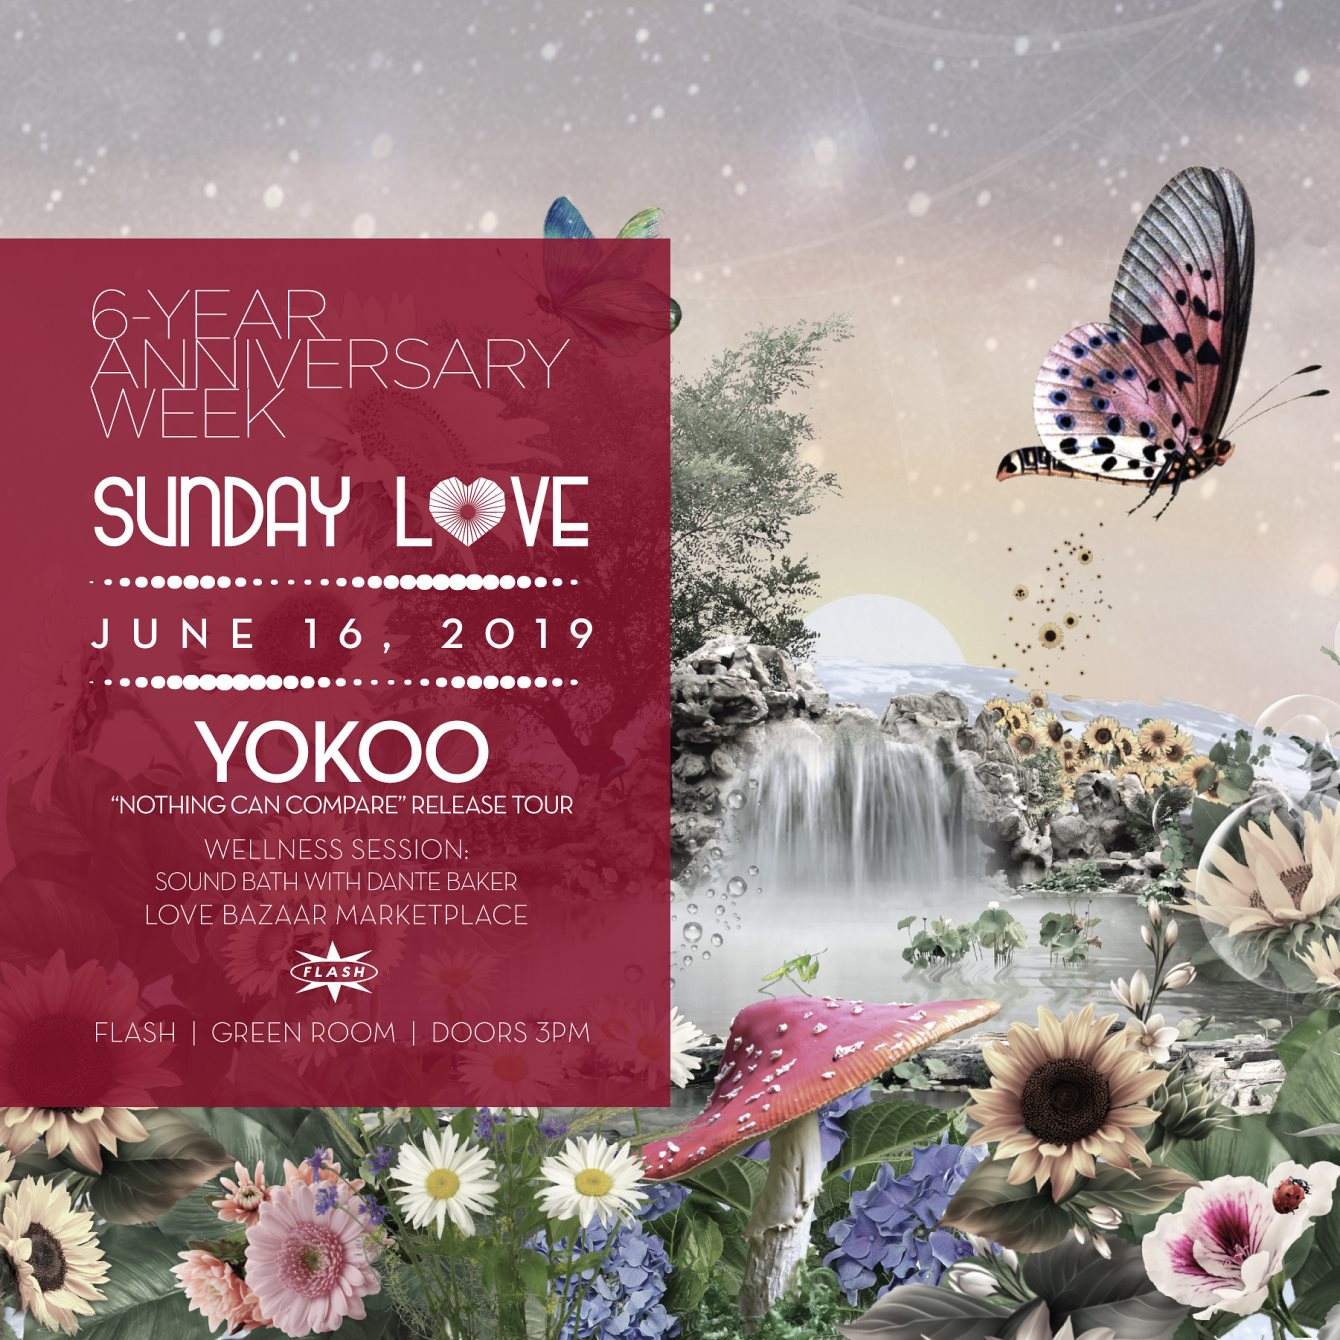 Flash 6-Yr Anniv x Sunday Love: YokoO “Nothing Can Compare” Release Tour - Página trasera